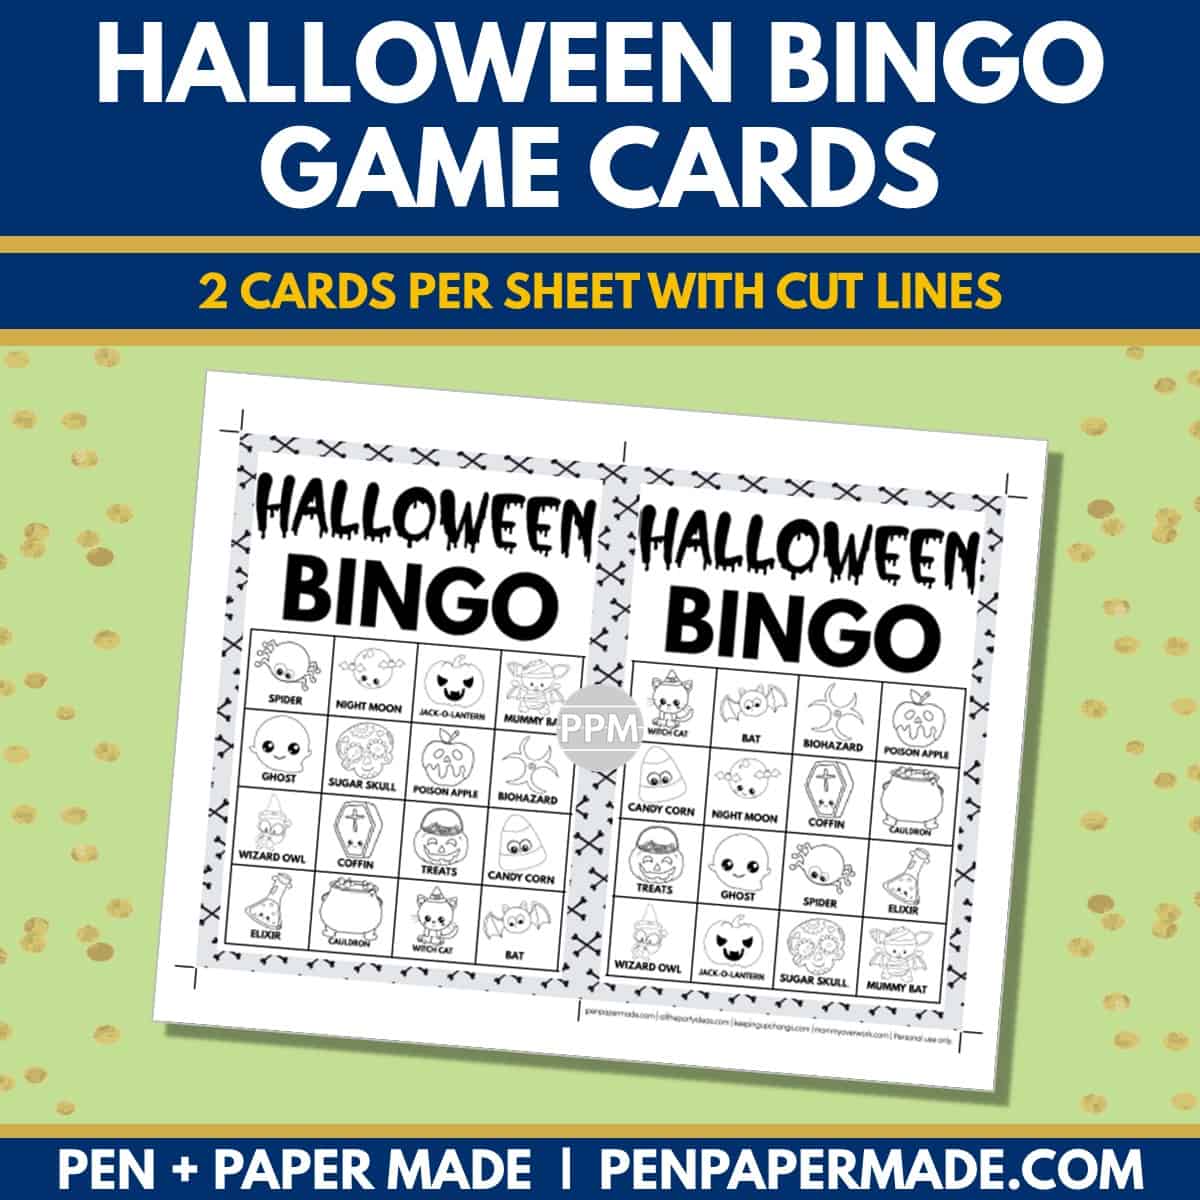 halloween bingo card 4x4 5x7 game boards with images and text words.